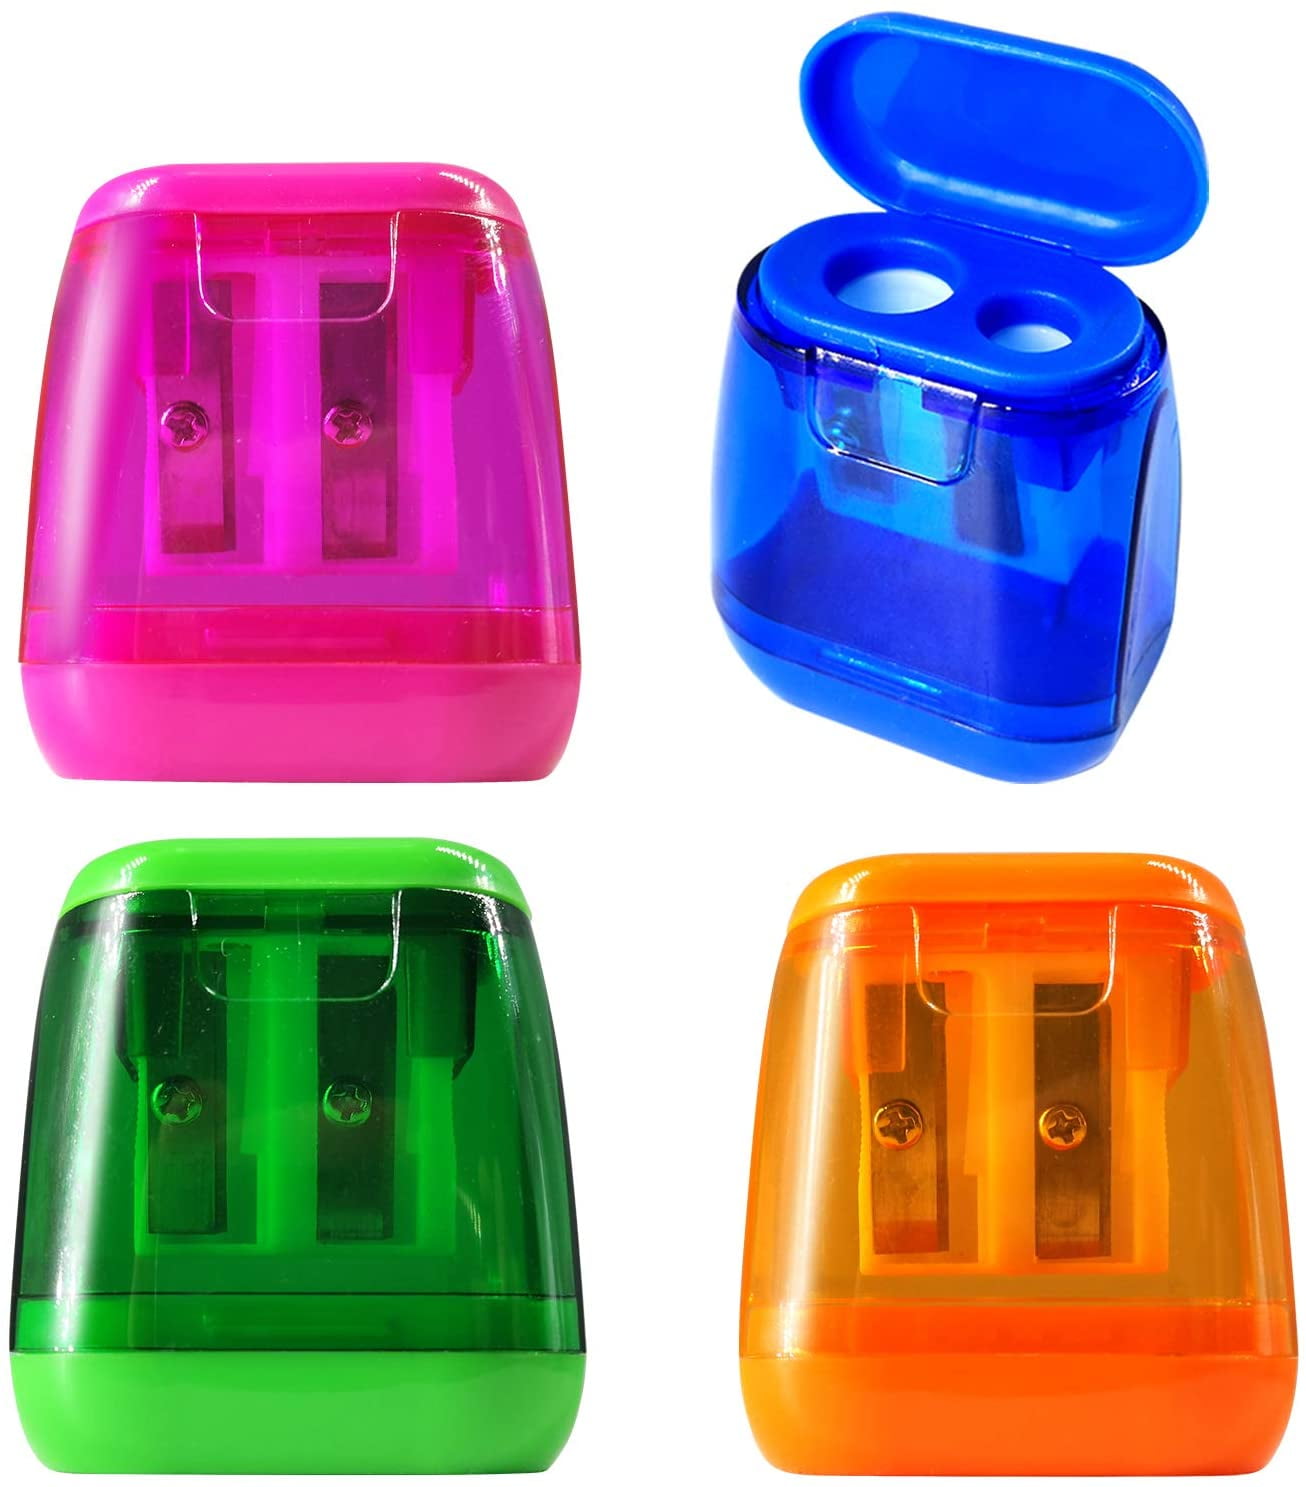 Pencil Sharpener, Manual Pencil Sharpeners, 4Pcs Colorful Compact Dual  Holes Pencil Sharpeners With Lid, Colored Pencil Sharpener For Kids &  Adults, Portable Pencil Sharpener For Travel School Office 